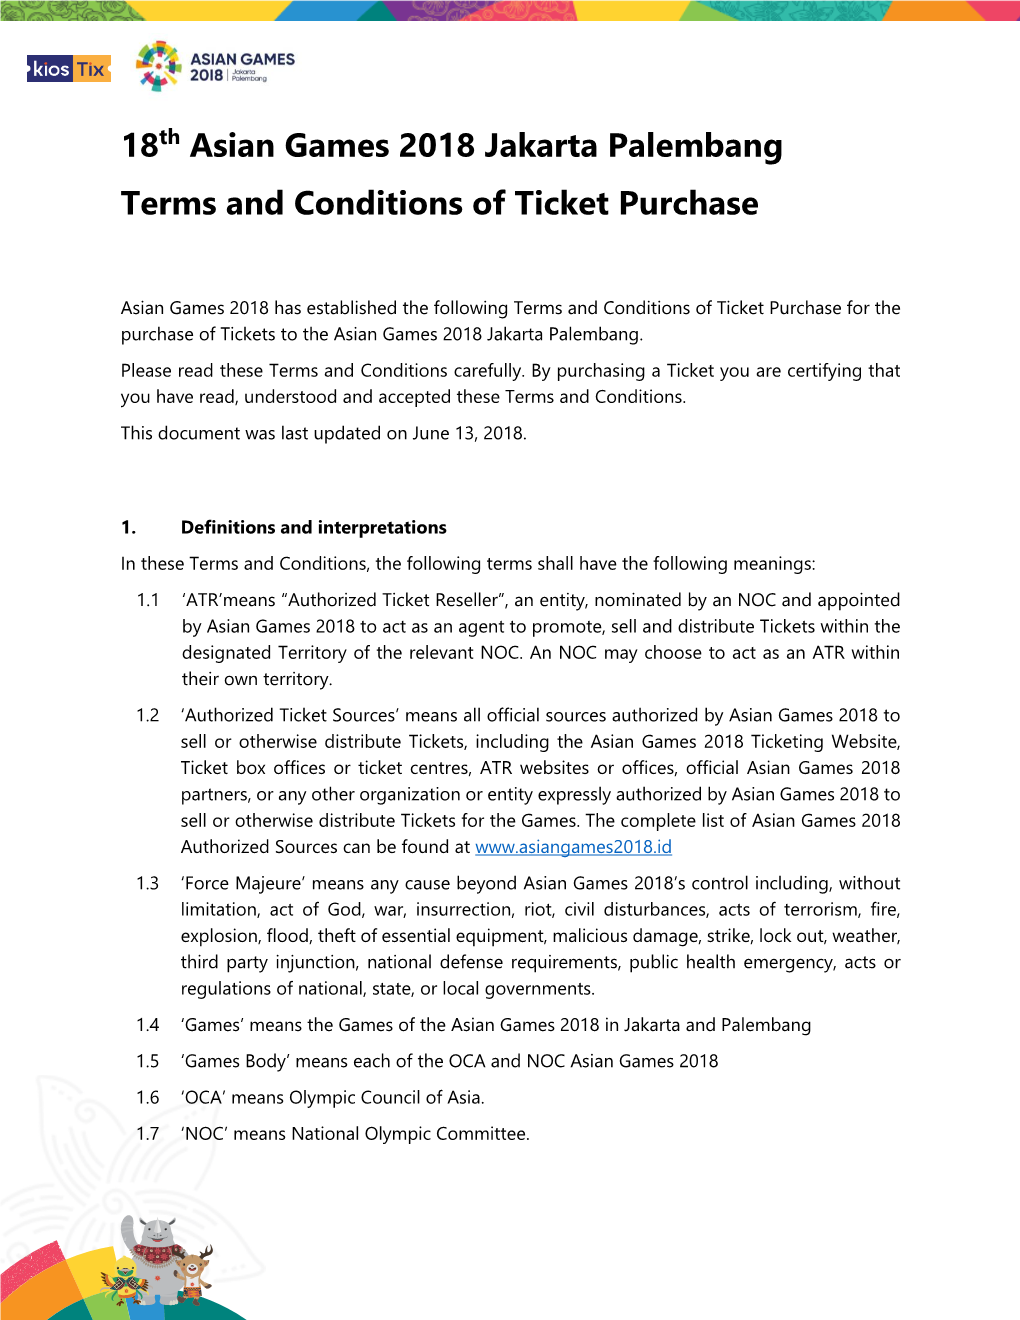 18Th Asian Games 2018 Jakarta Palembang Terms and Conditions of Ticket Purchase